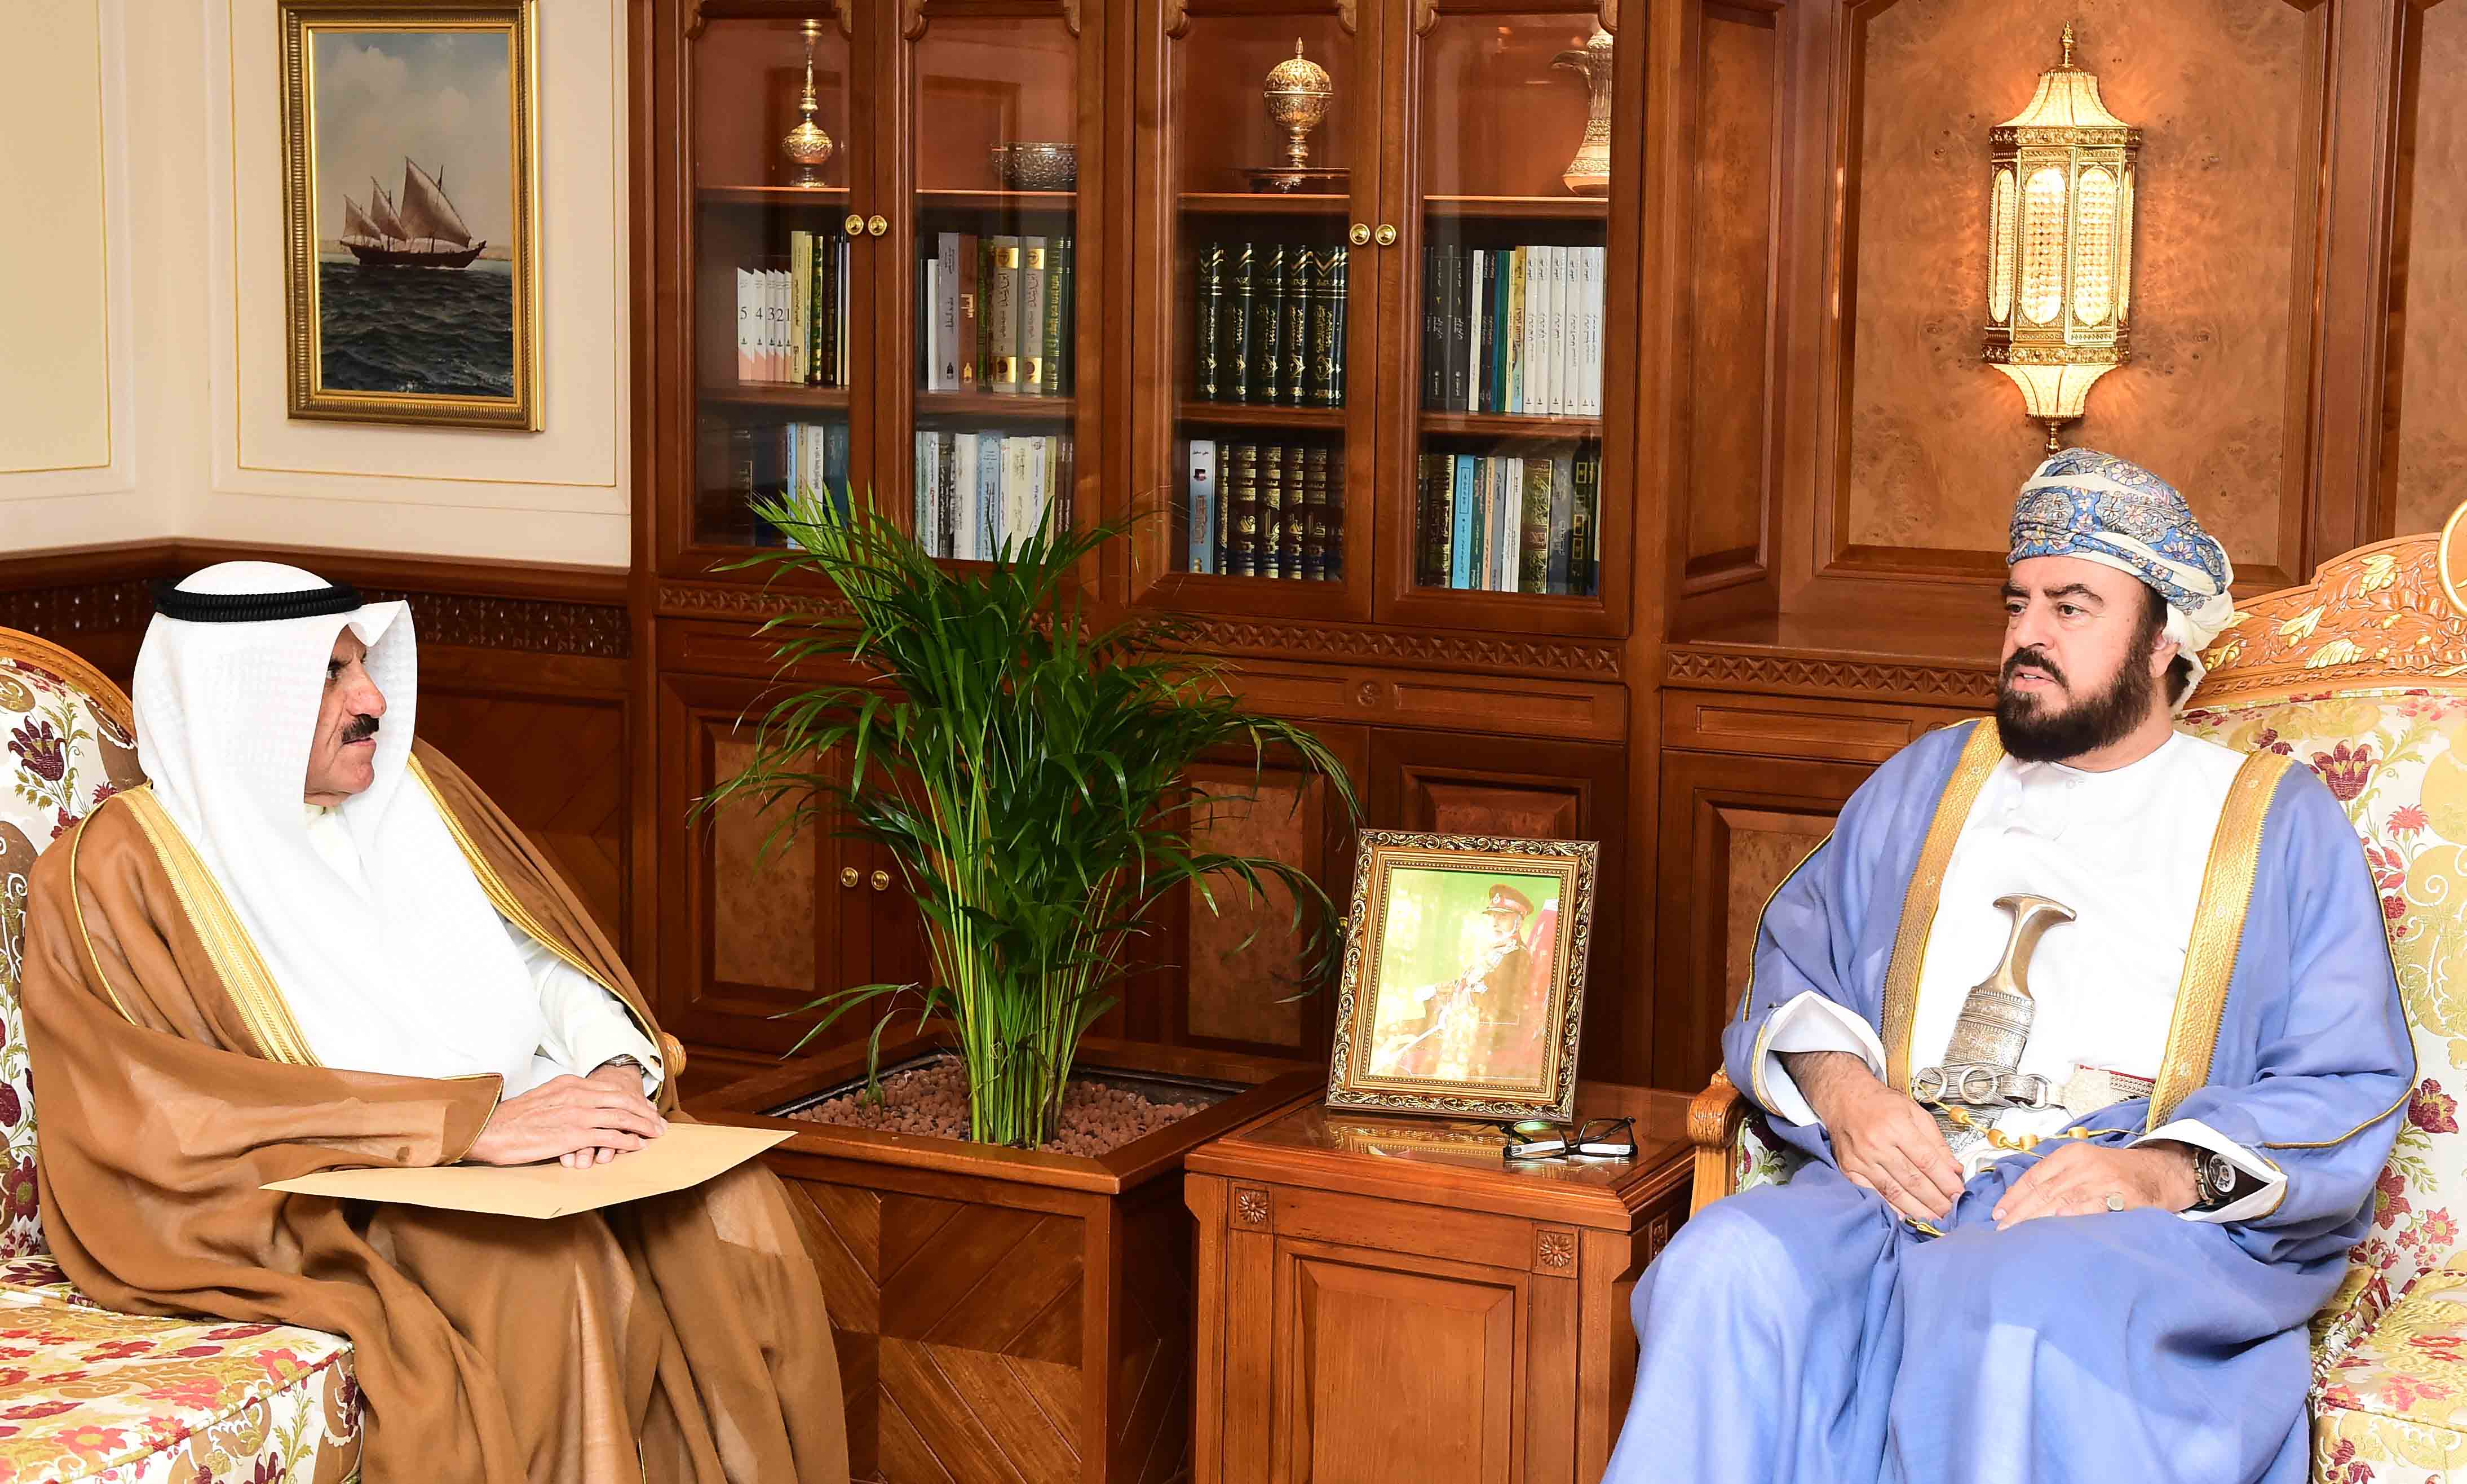 Oman Deputy Prime Minister for International Relations and Cooperation and Special Representative to Sultan of Oman Asaad Al-Saeed receives Kuwait Ambassador to Oman Fahad Al-Mutairi